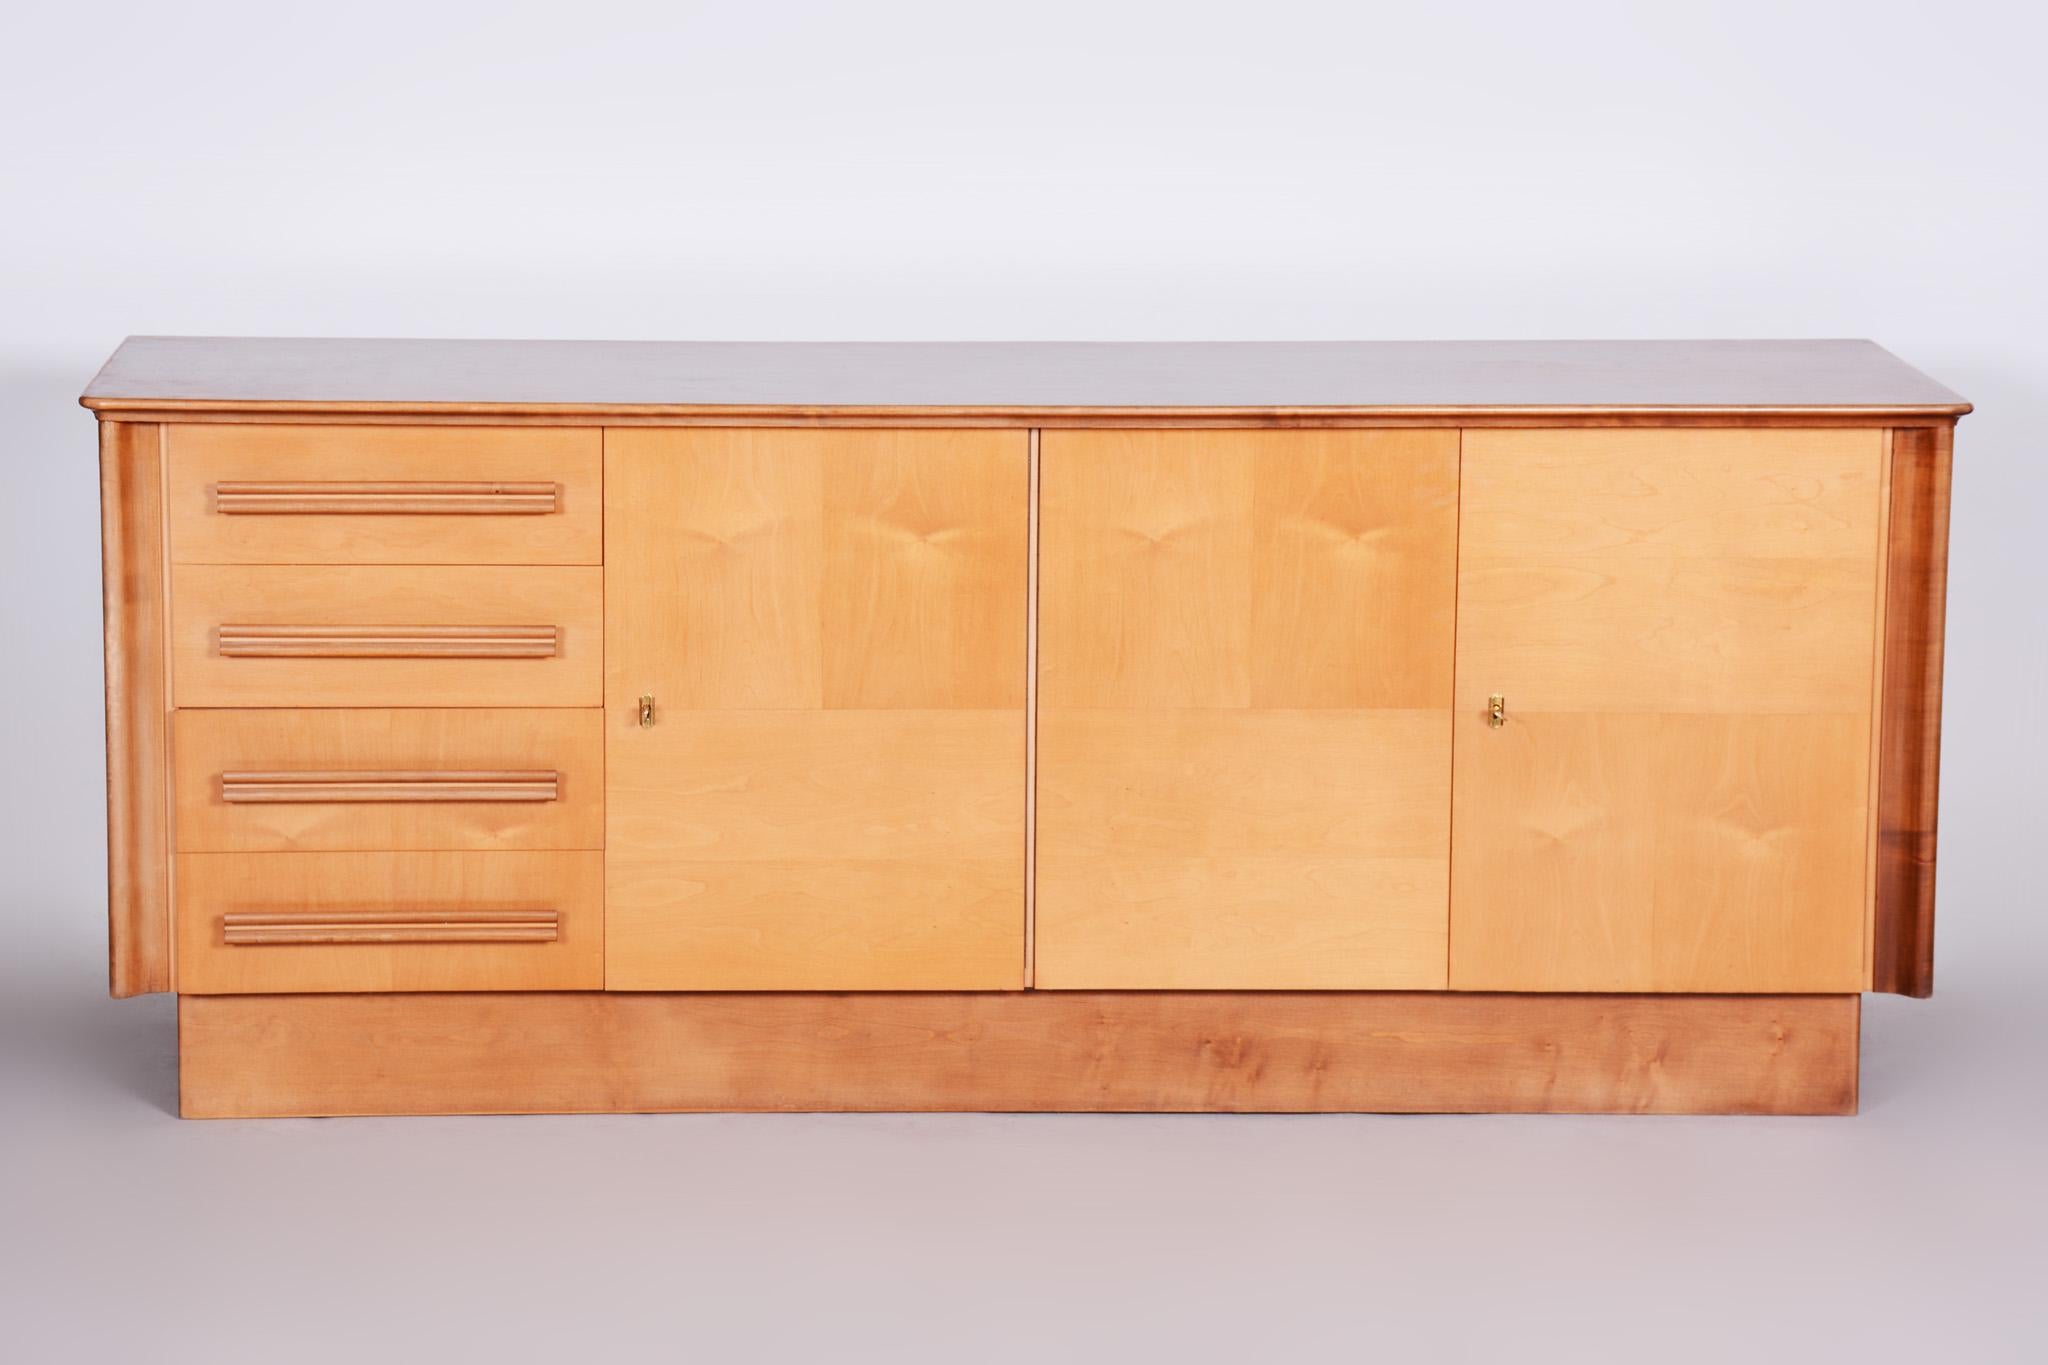 Czech Mid-Century sideboard.

Material: Maple 
Original very well preserved condition

We guarantee safe a the cheapest air transport from Europe to the whole world within 7 days.
The price is the same as for ship transport but delivery time